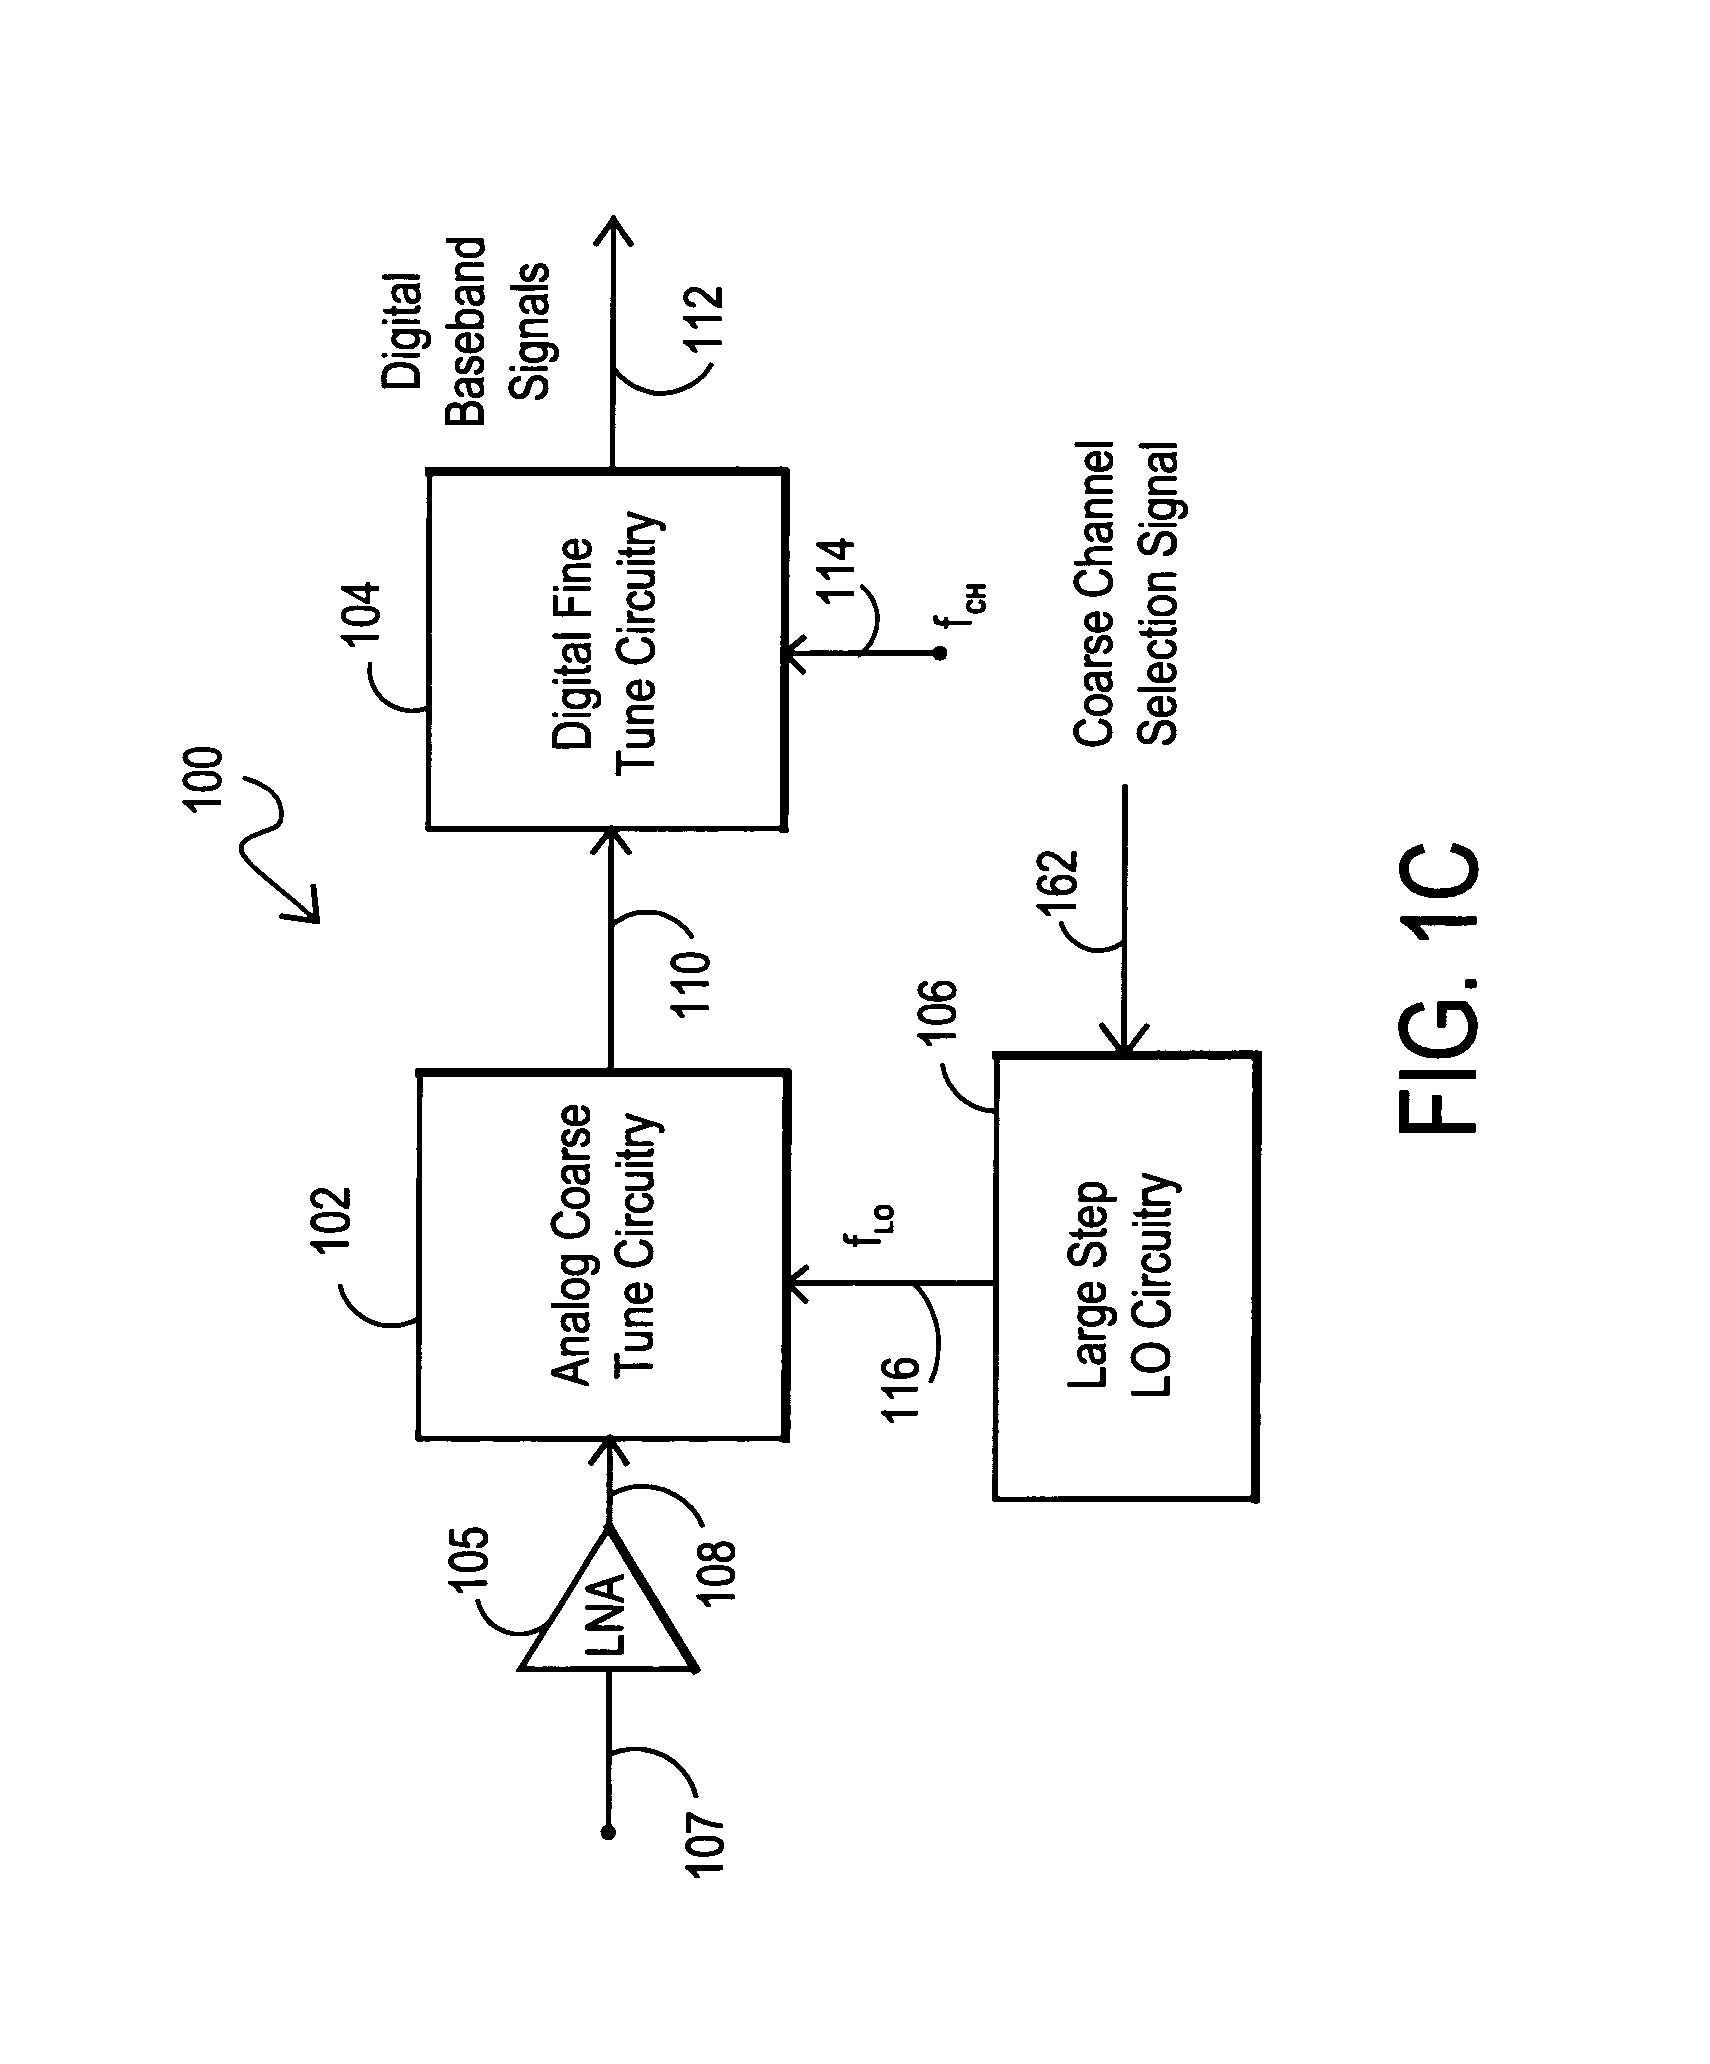 Integrated multi-tuner satellite receiver architecture and associated method